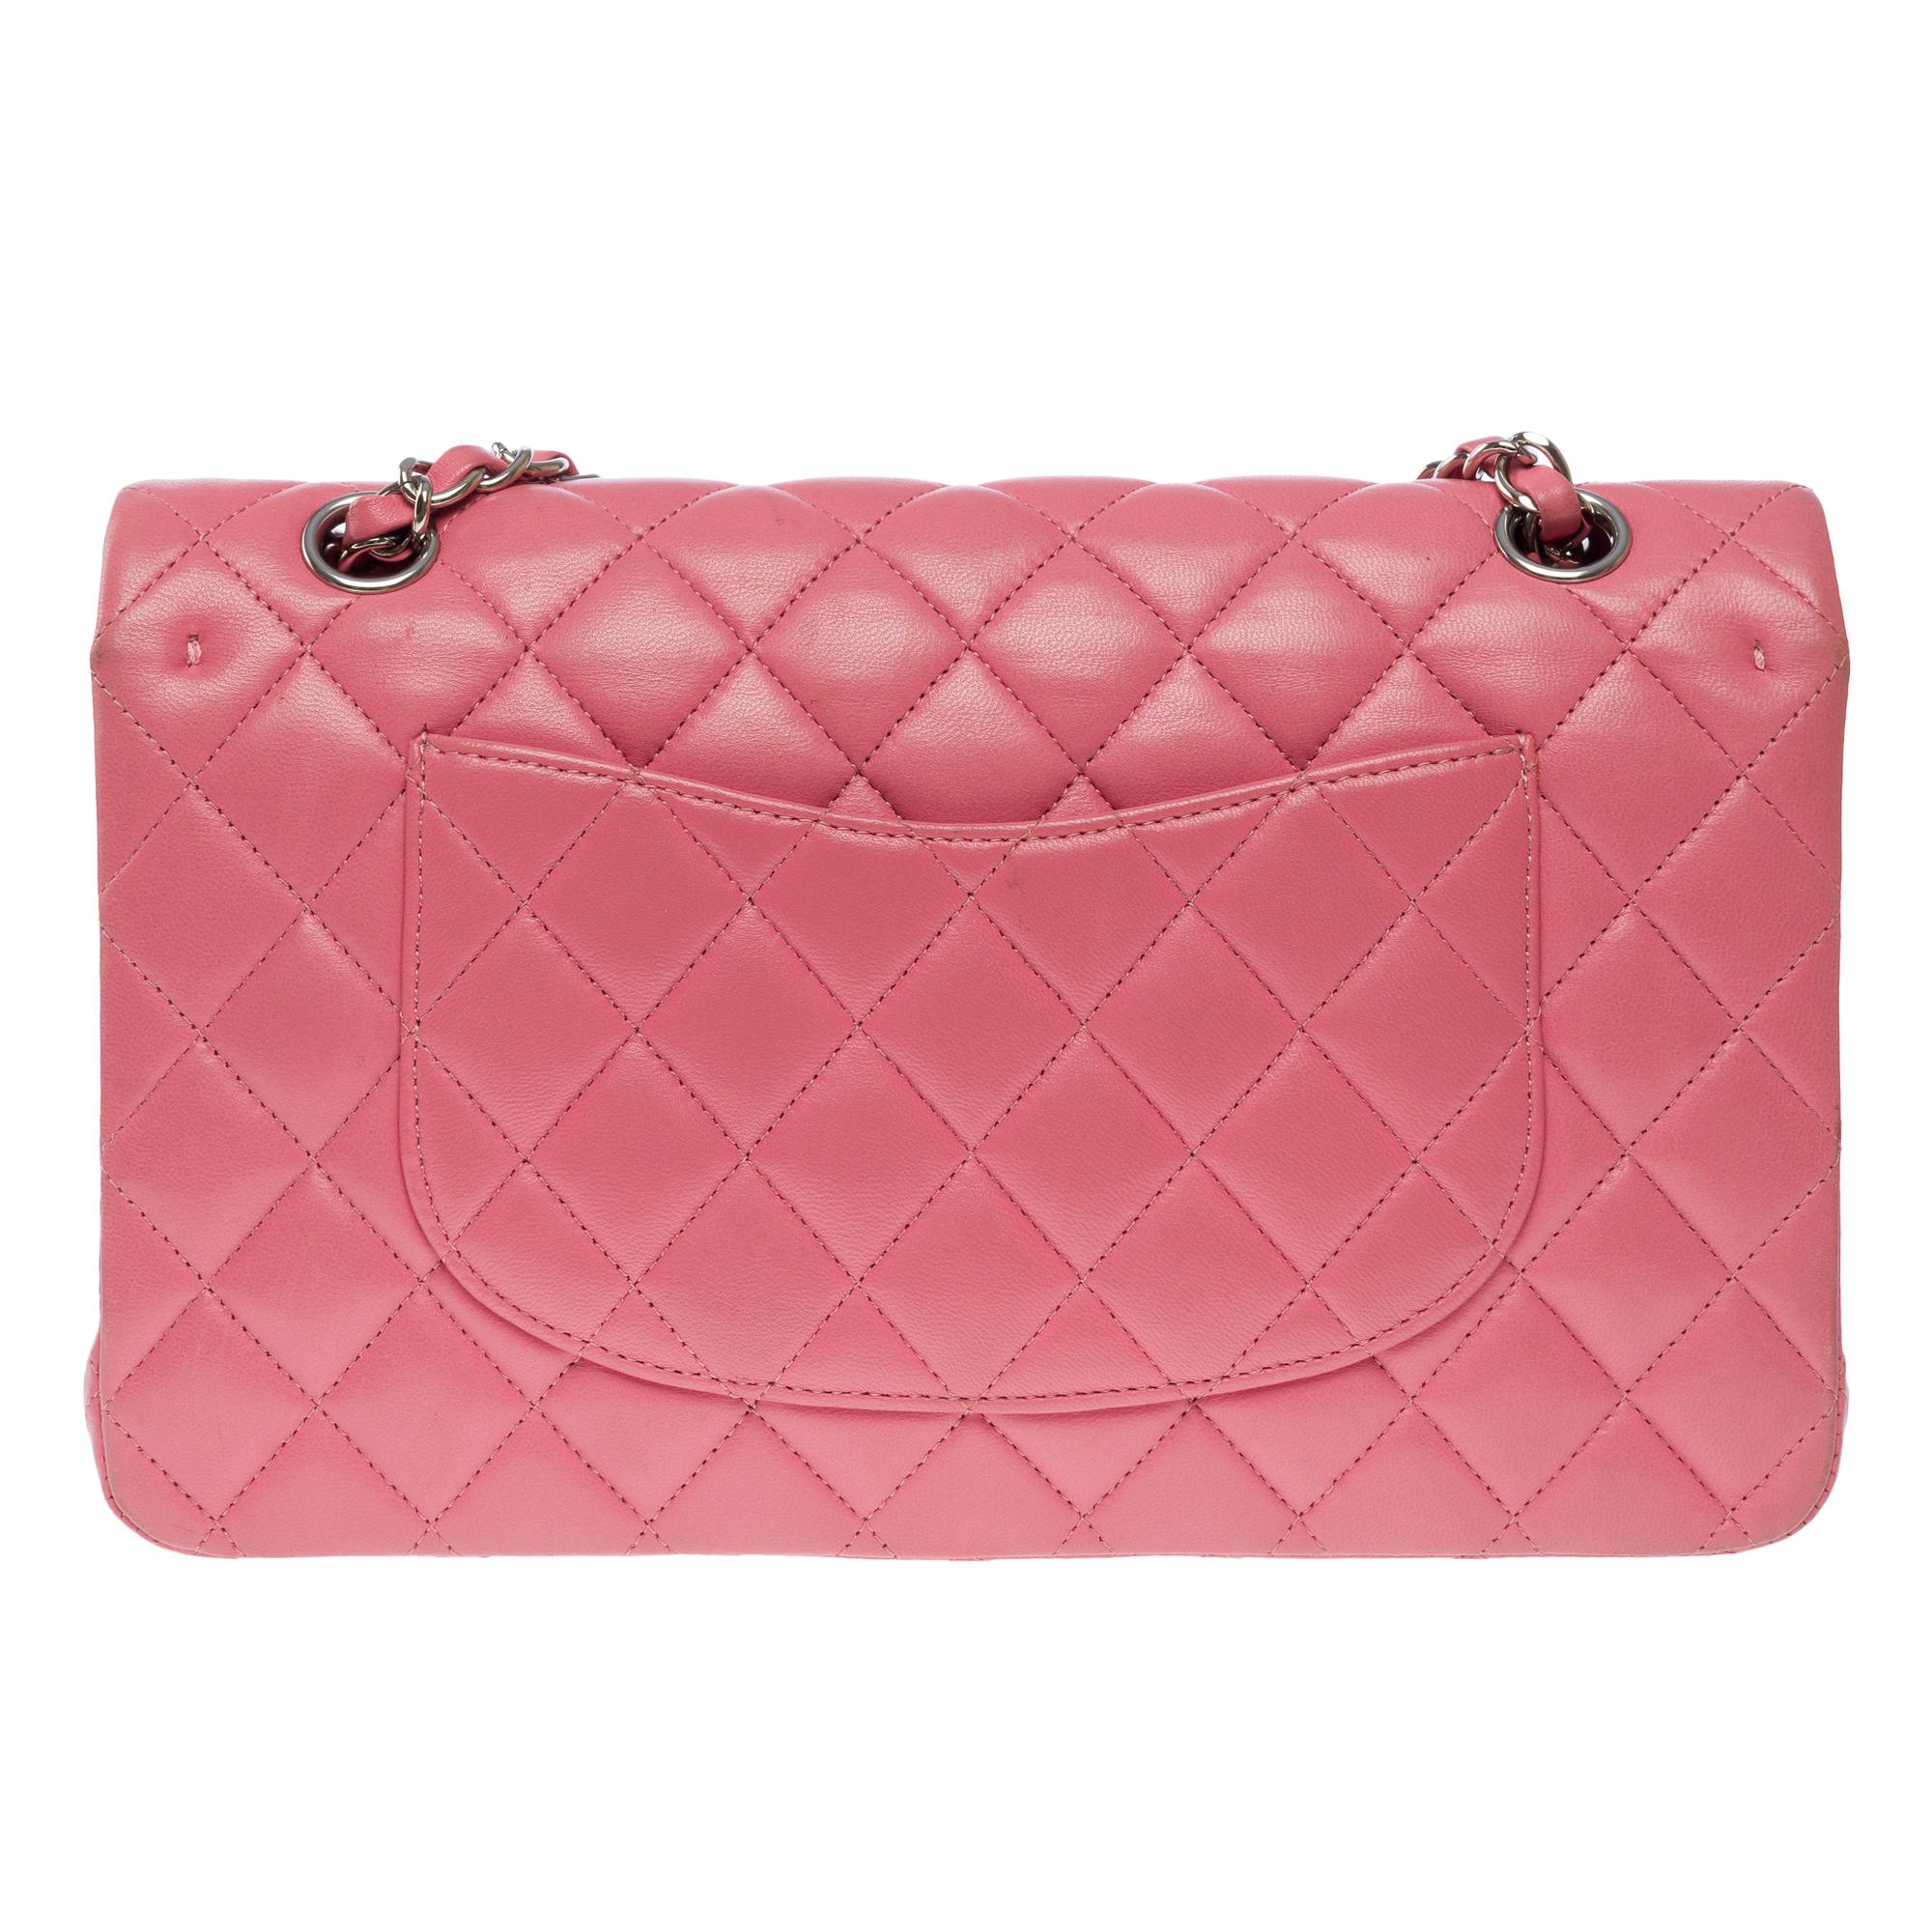 Women's Chanel Timeless double flap shoulder bag in Pink quilted lambskin leather, SHW For Sale